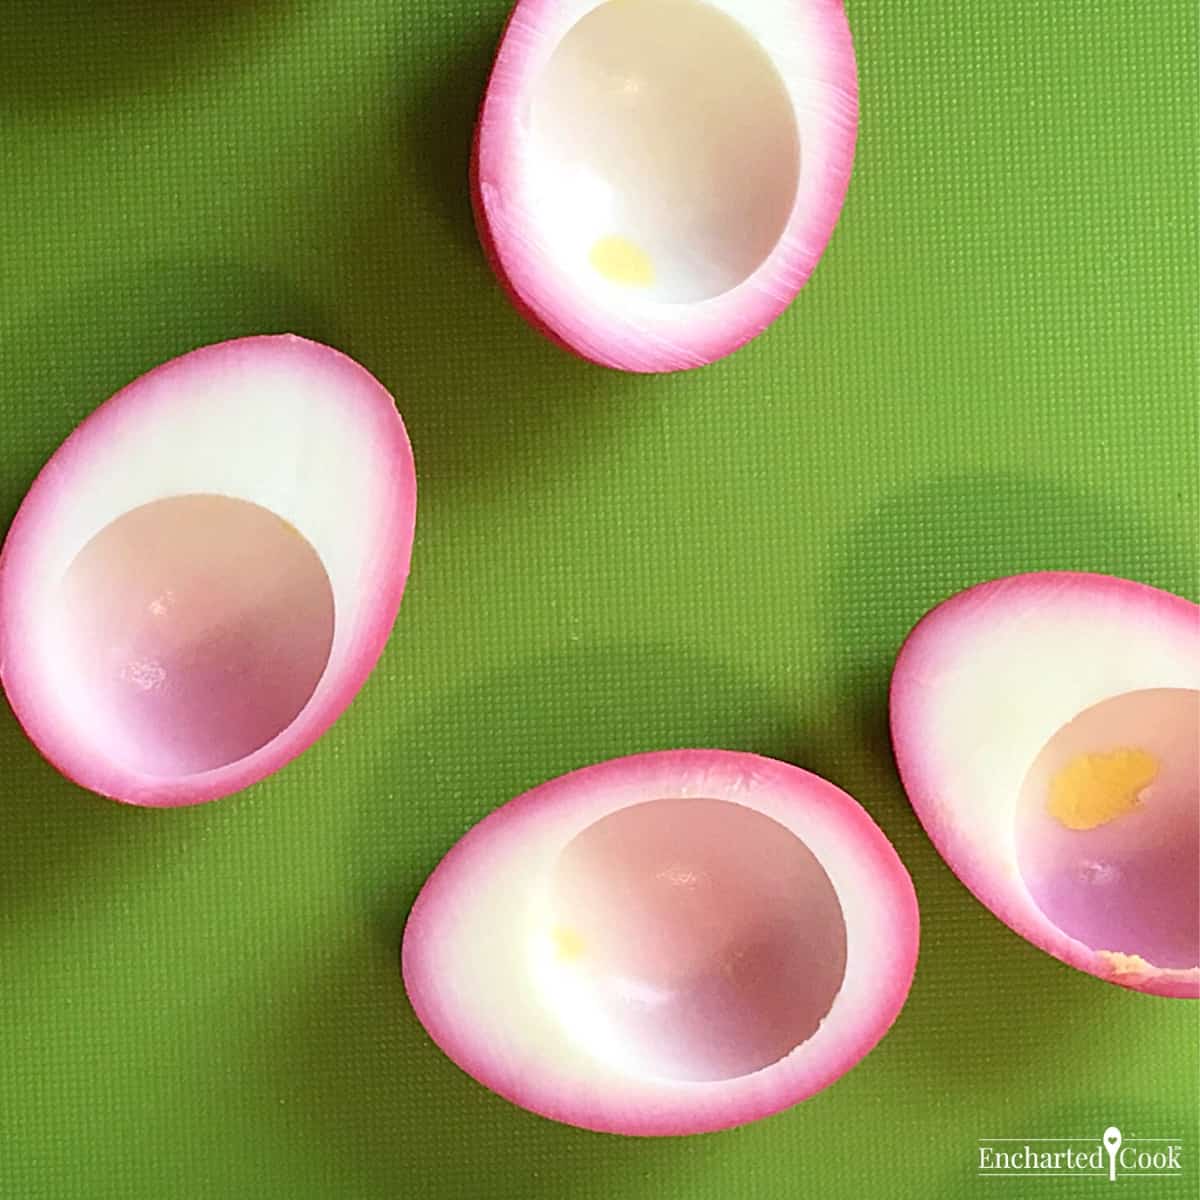 Pink-colored hard-cooked eggs are cut in half and the yolk is removed.